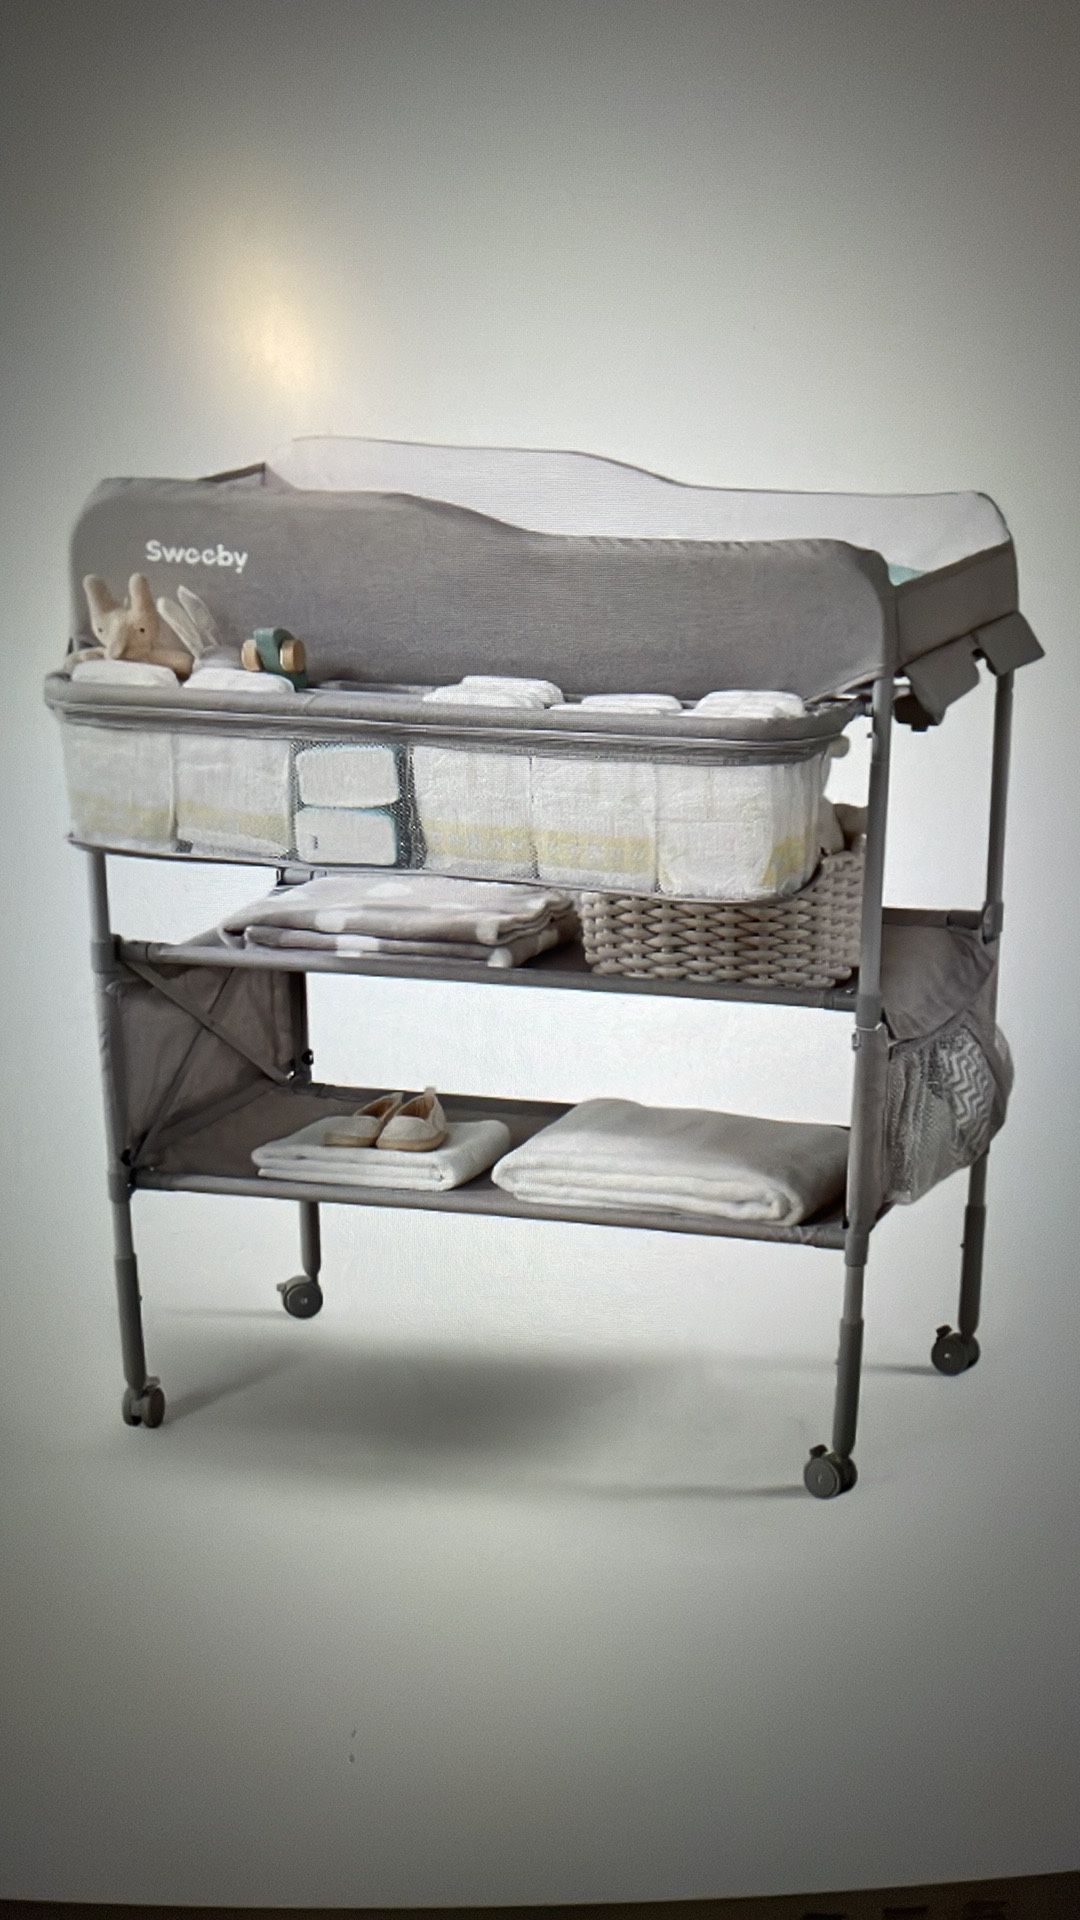 sweeby portable baby changing table